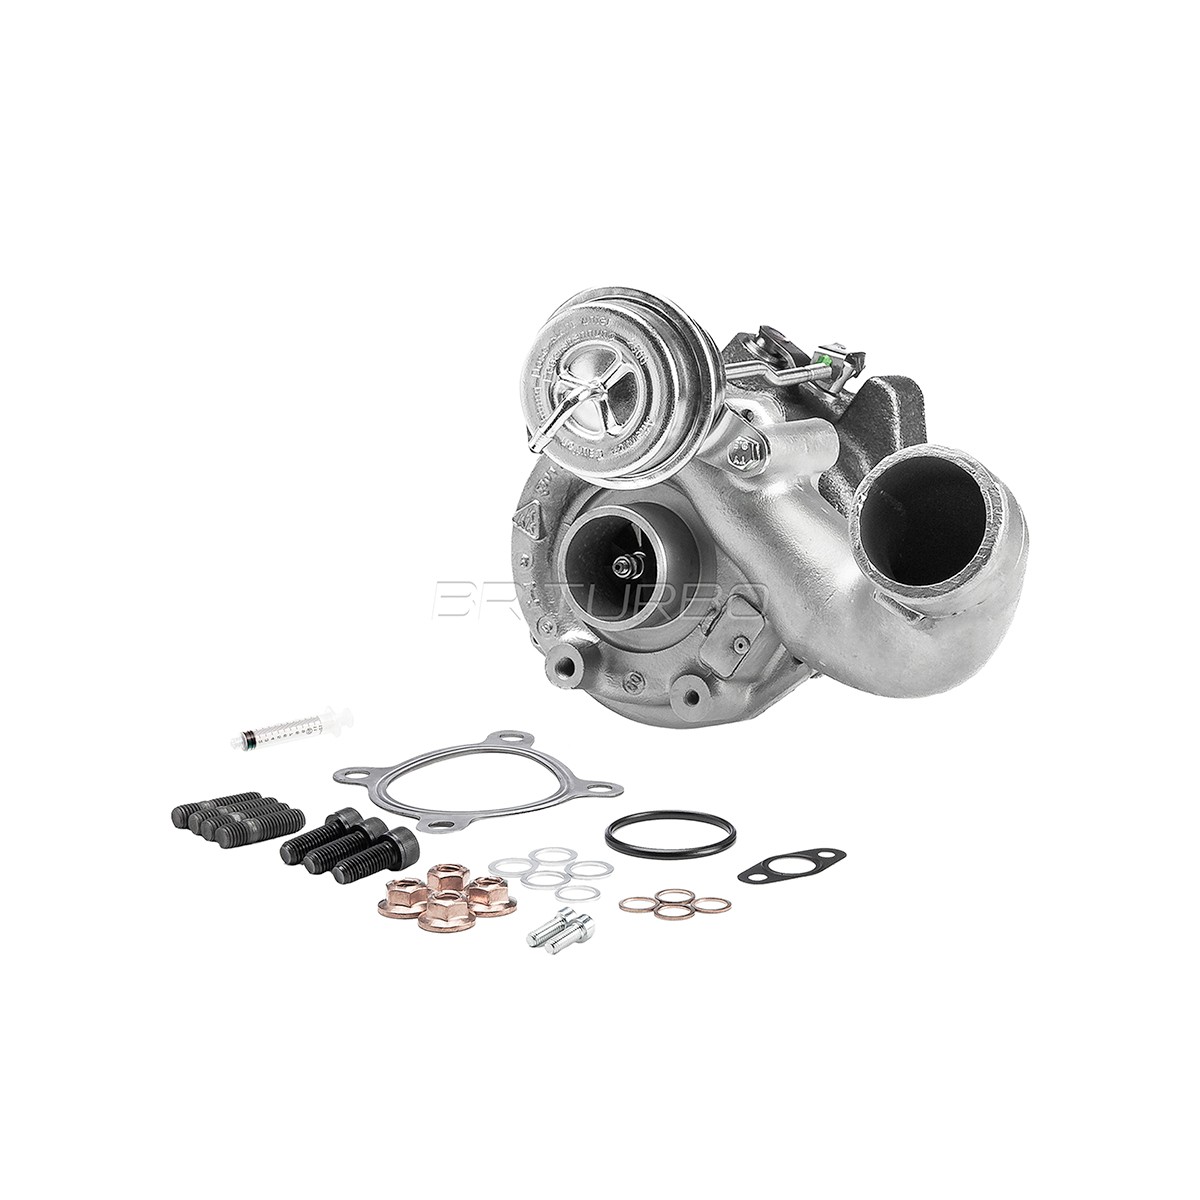 53039880017RSM Turbocharger REMANUFACTURED TURBOCHARGER WITH MOUNTING KIT BR Turbo 53039880017RSM review and test